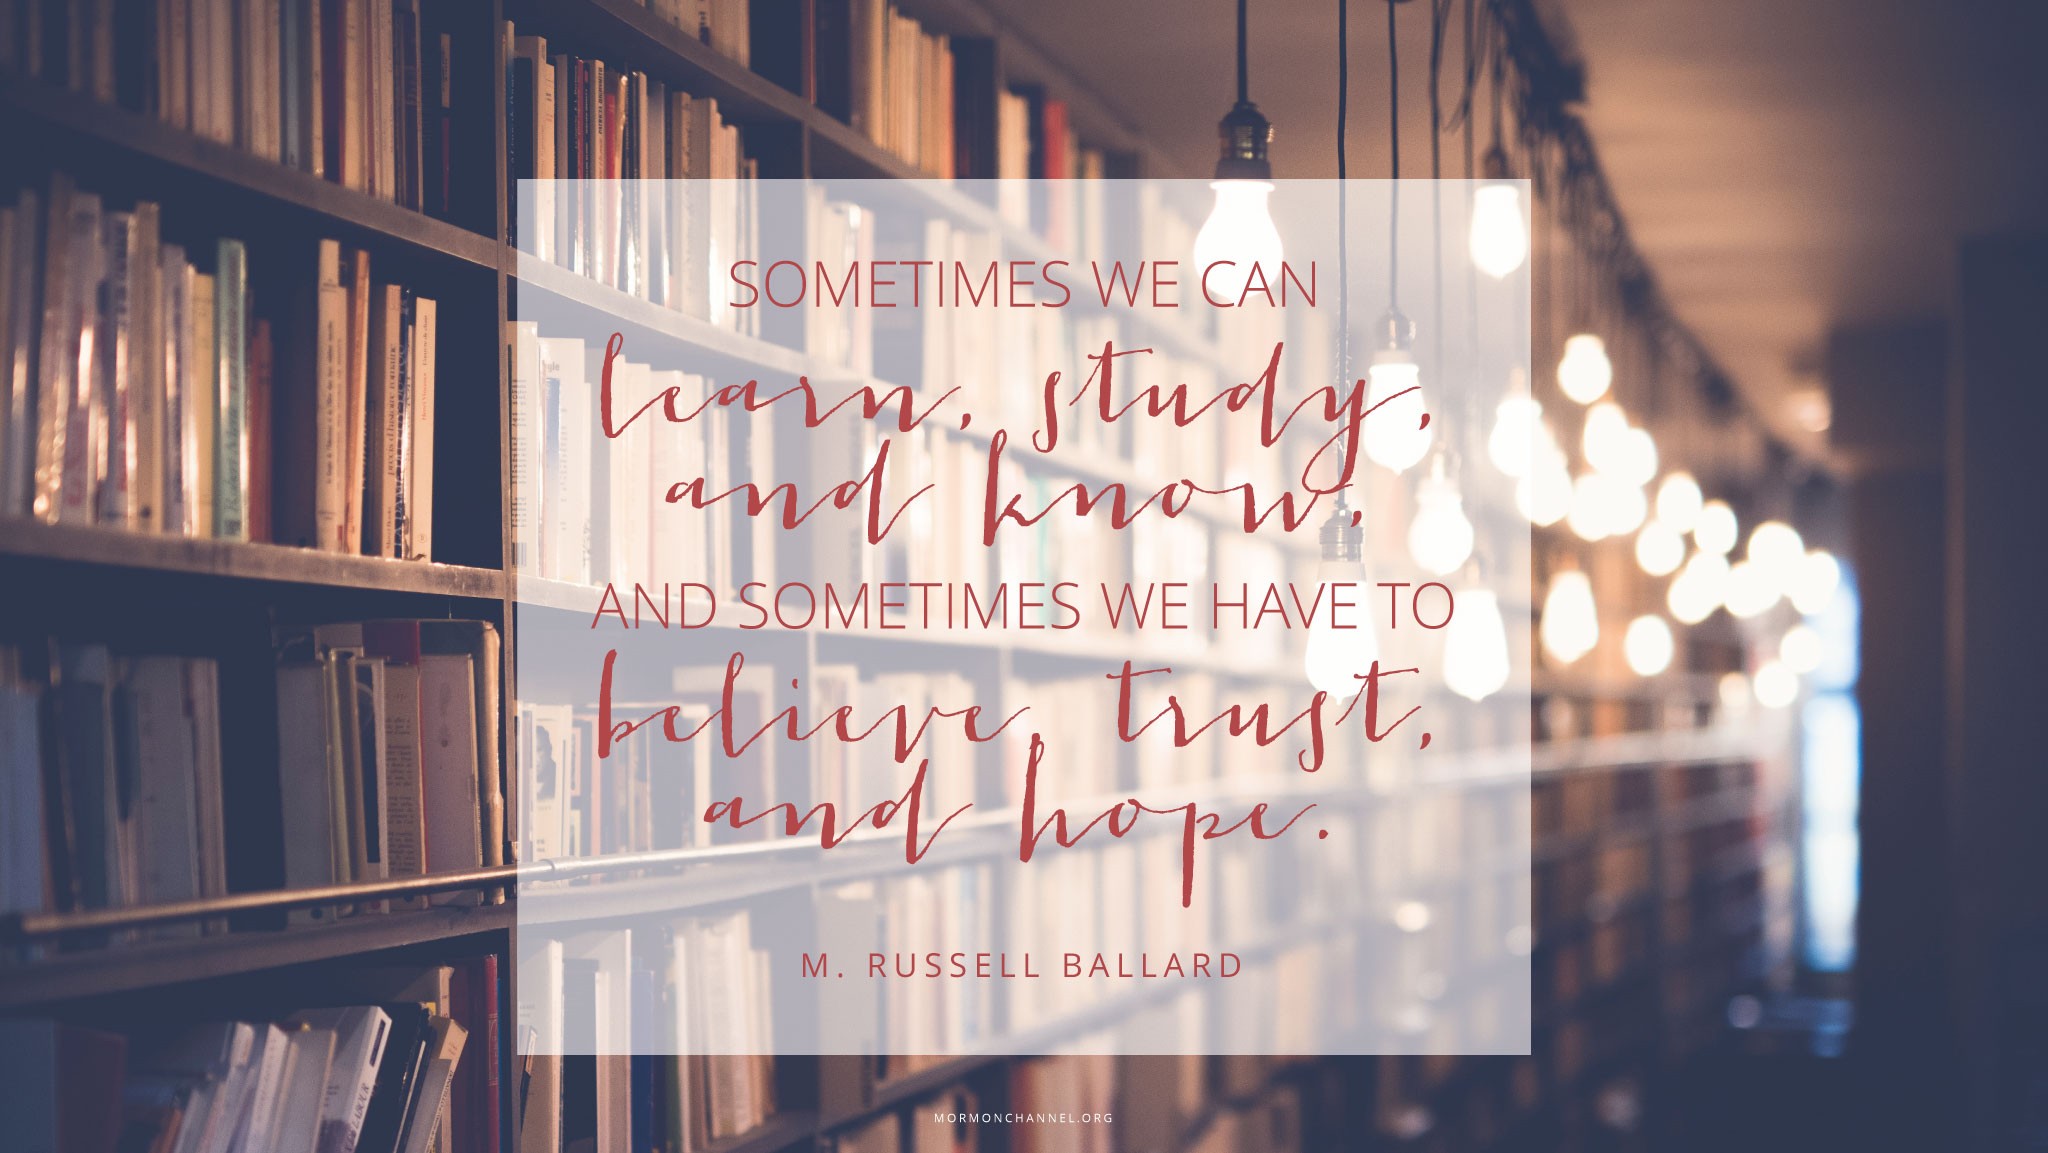 A long bookshelf illuminated by a string of hanging lightbulbs, with a quote by Elder M. Russell Ballard: “Sometimes we can learn, study, and know, and sometimes we have to believe, trust, and hope.”